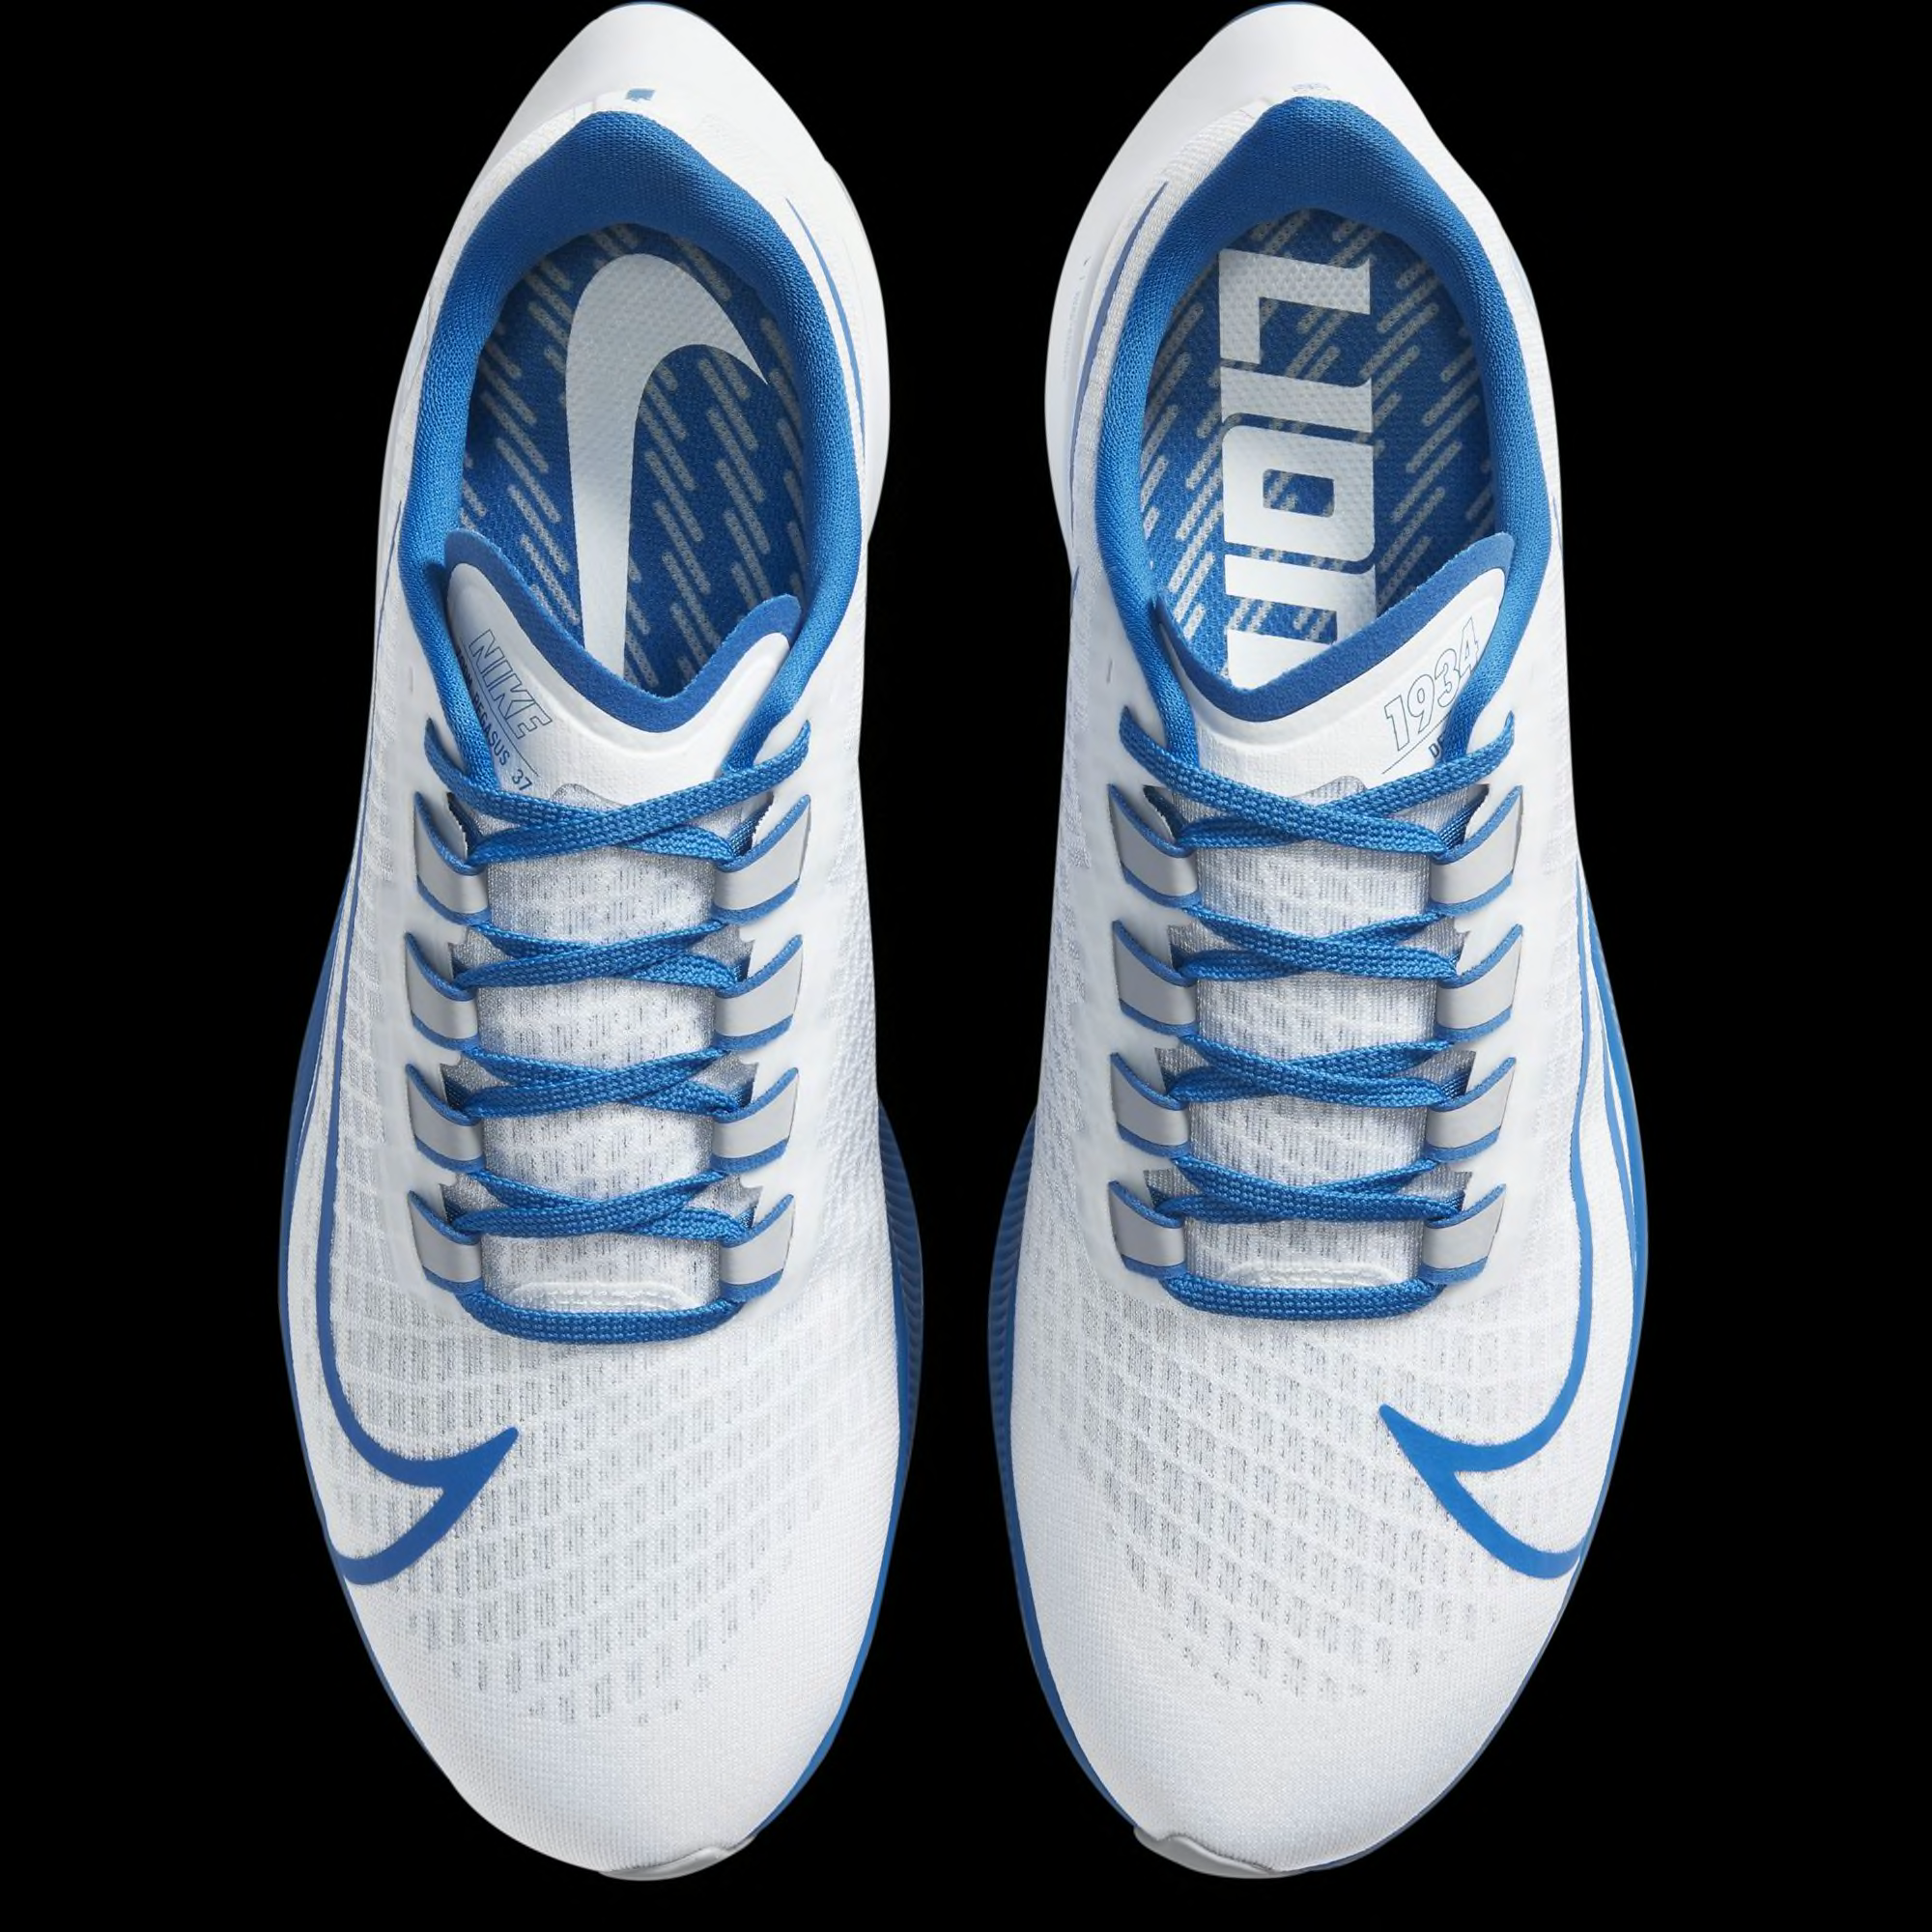 These Detroit Lions Nike running shoes 